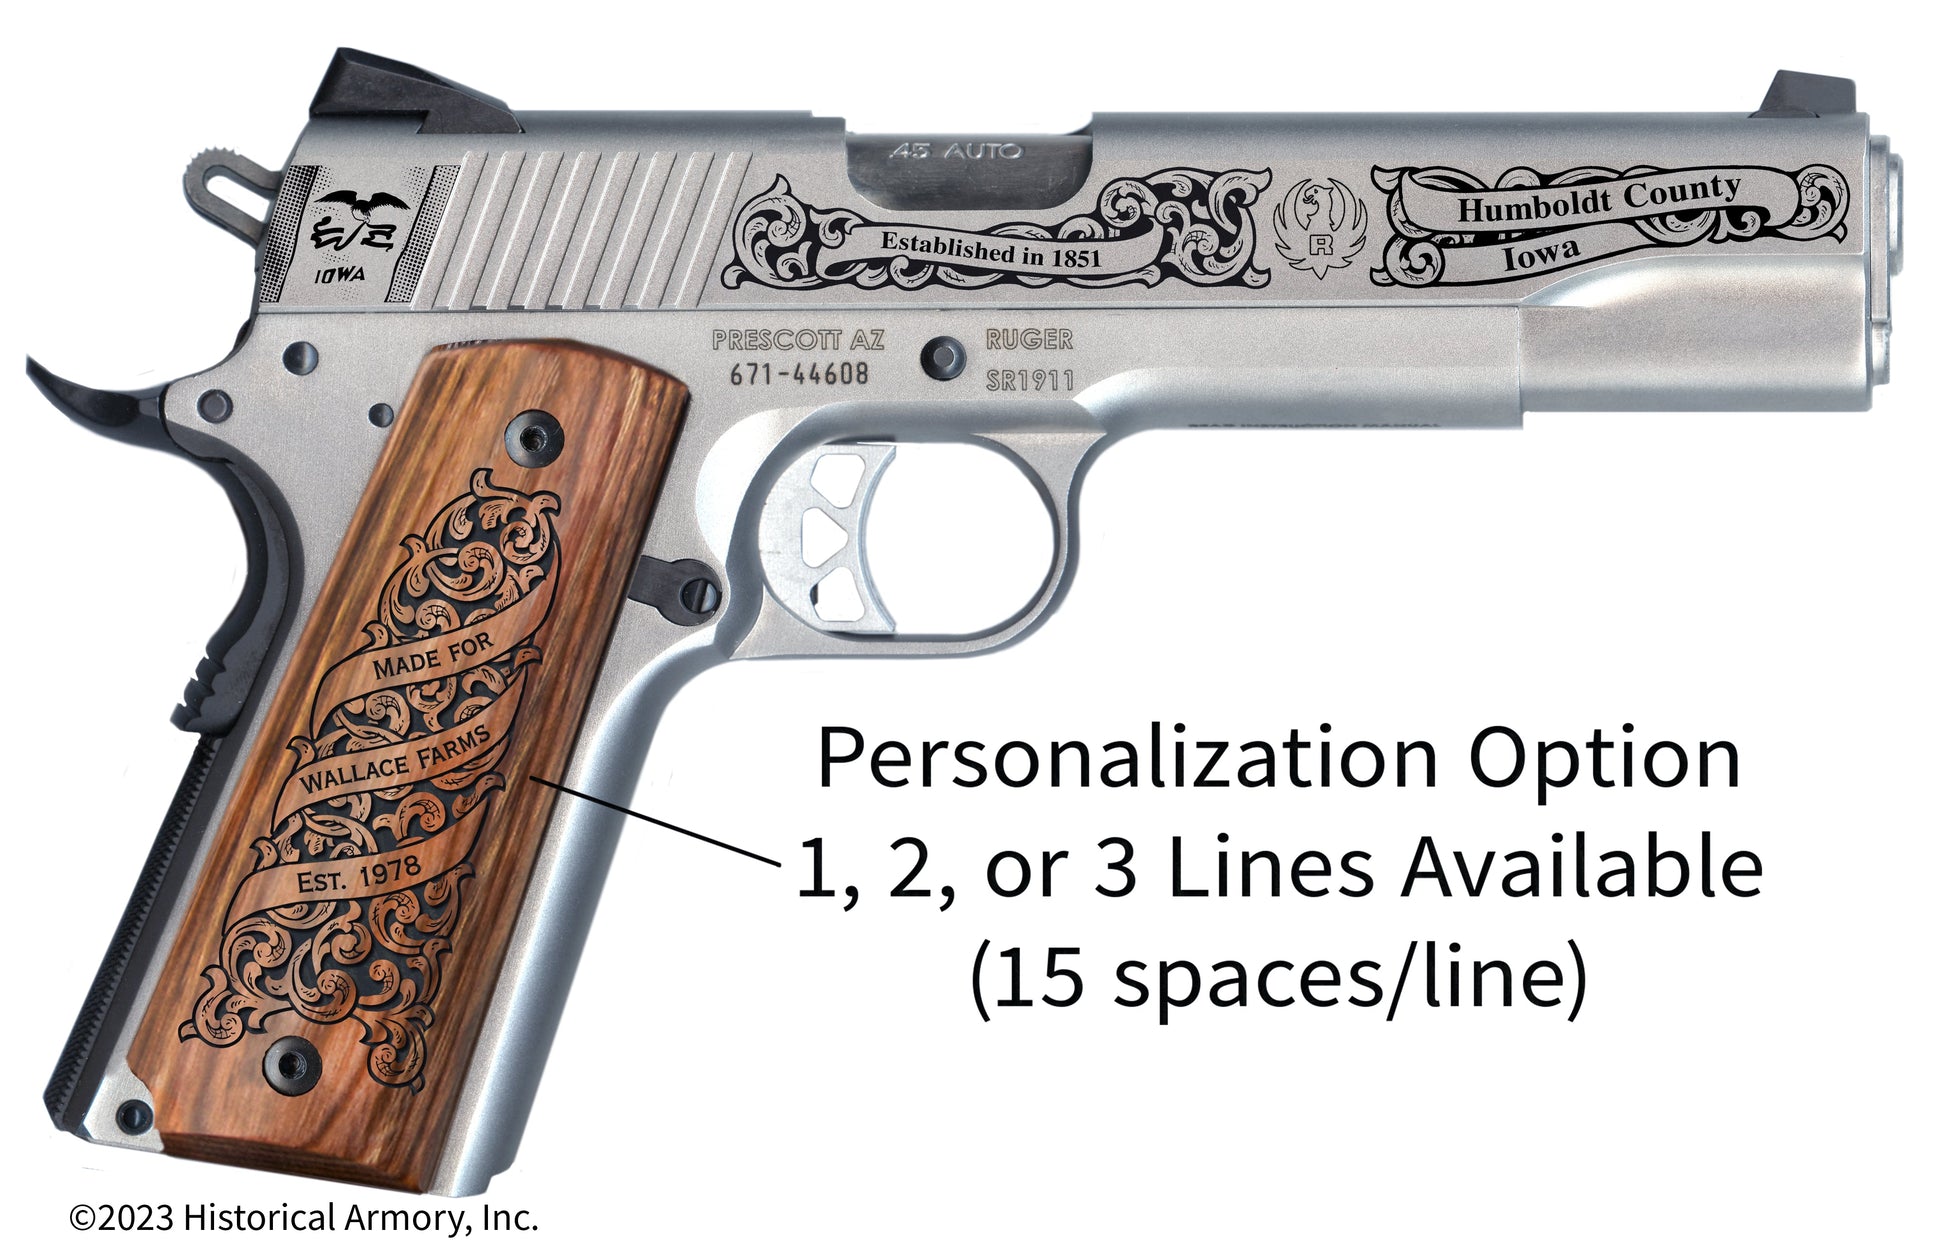 Humboldt County Iowa Personalized Engraved .45 Auto Ruger 1911